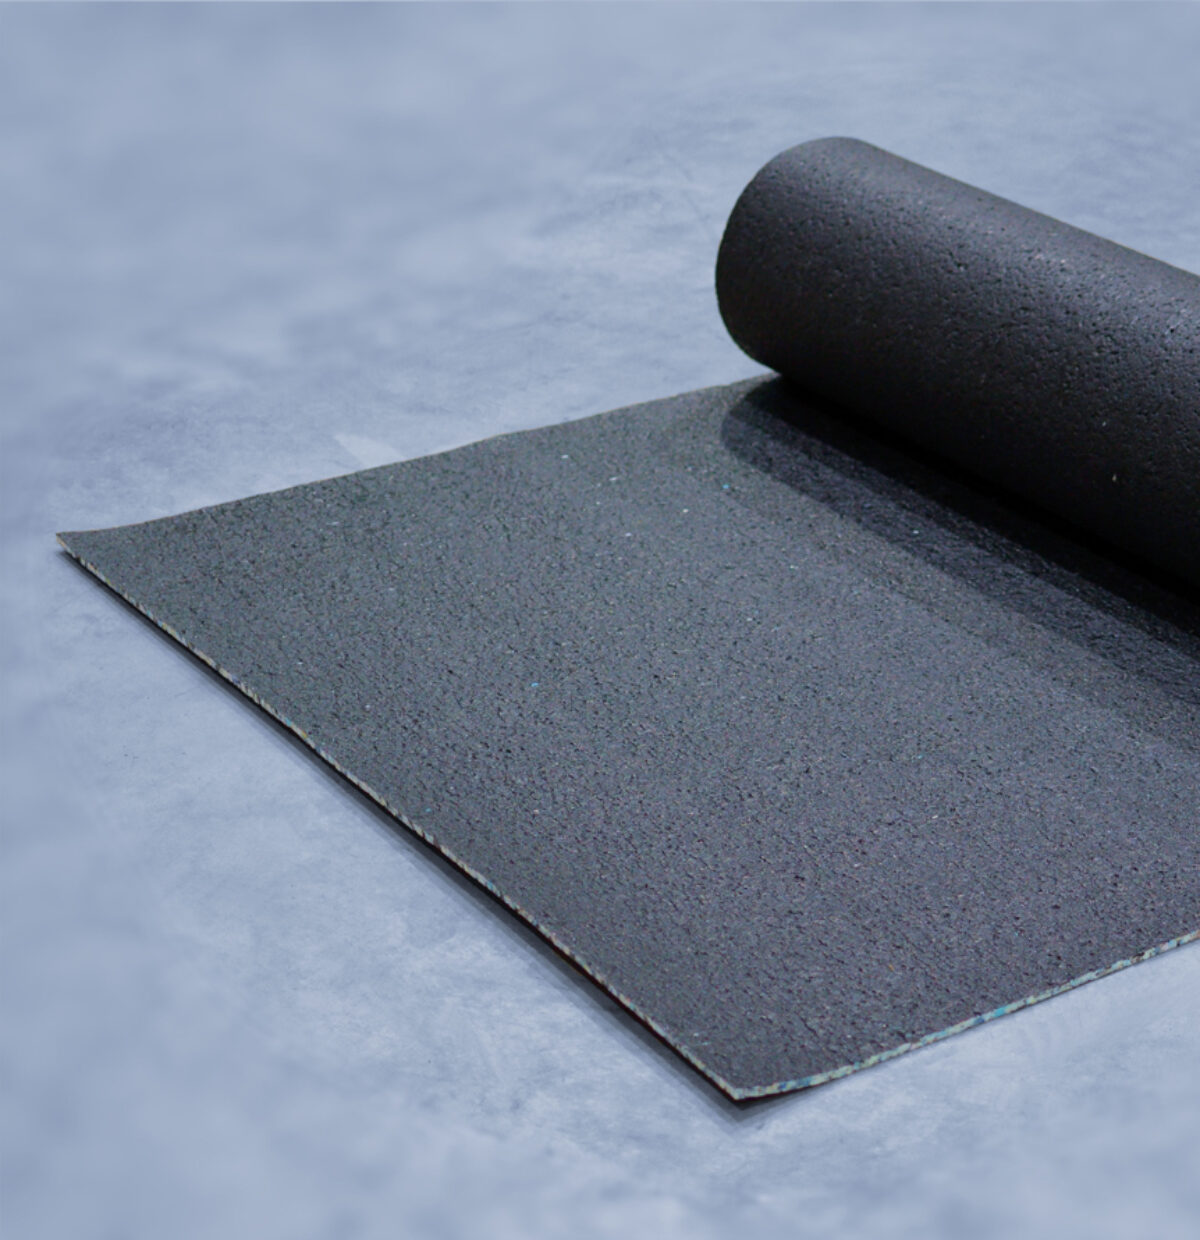 10mm Thick PU Carpet Underlay Rolls, Choose From 30 Sizes, 5m² Total Area